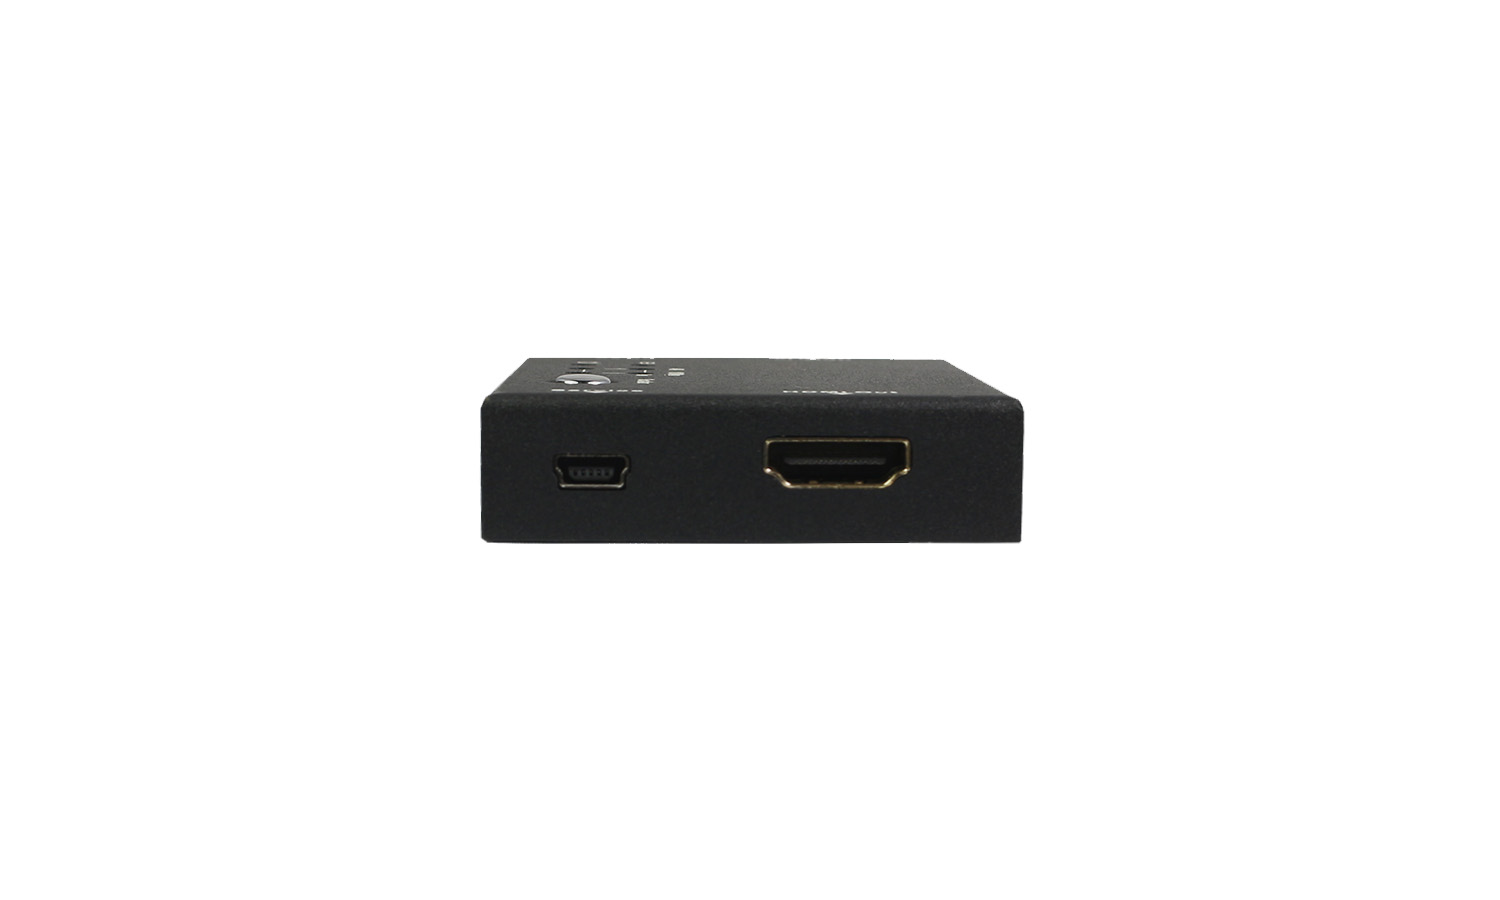 BZBGEAR BZ-PT-SH2 HDMI 18Gbps 20M Repeater Equalizer Booster Plus 4K Up and Down Scaling